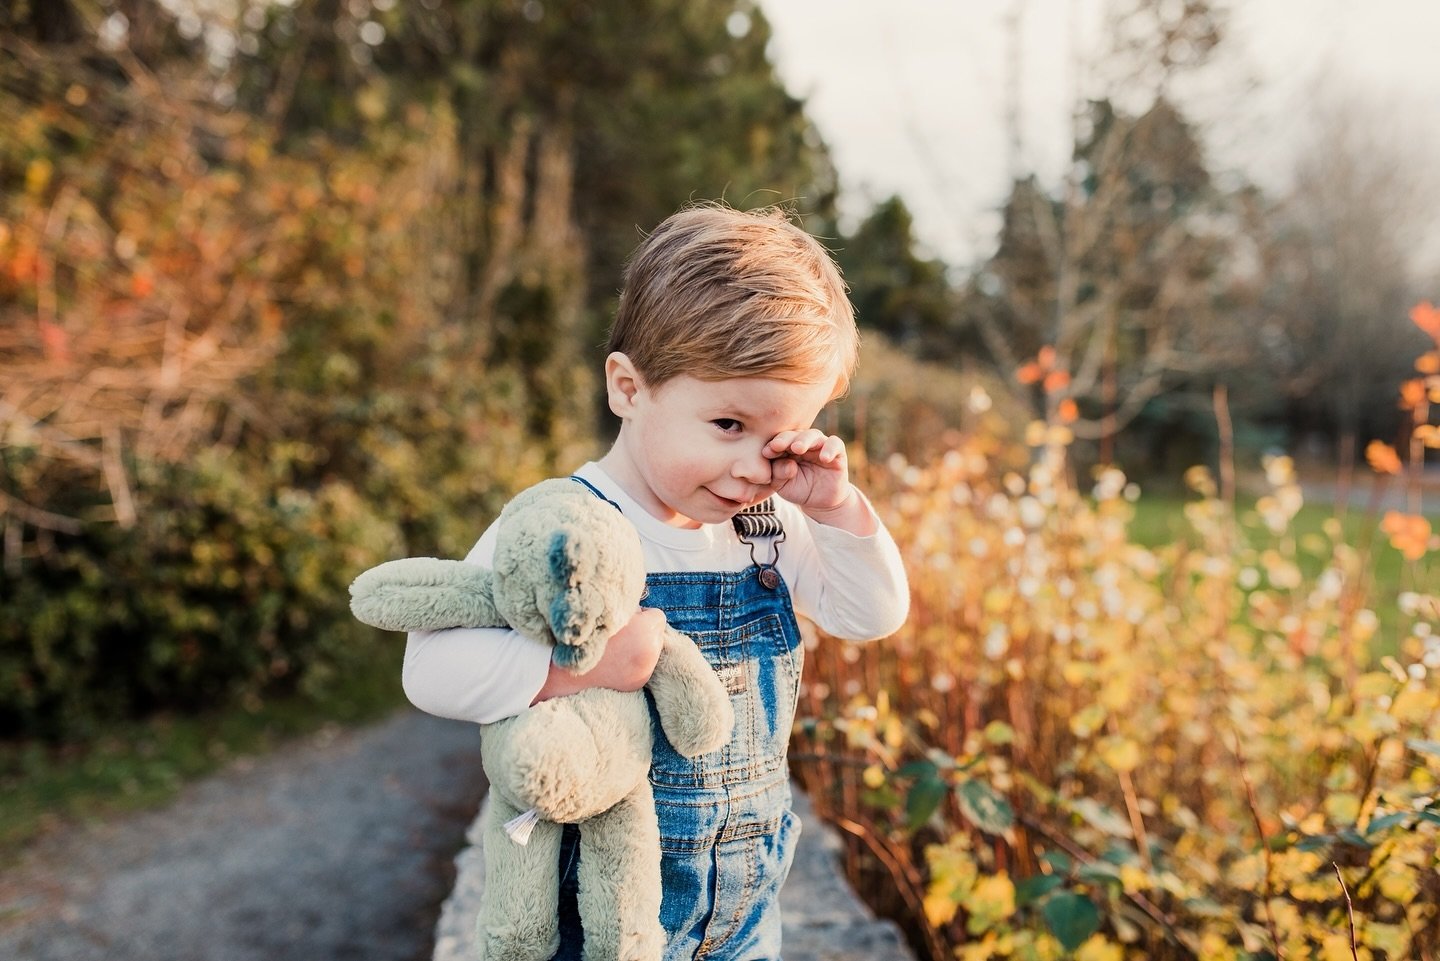 Adventures are better with a buddy. Especially when they&rsquo;re as huggable as this one.⁠
.⁠
.⁠
.⁠
.⁠
.⁠
.⁠
#jessicabseattlephotography #seattlefamilyphotographer #seattlefamily #seattleportraitphotographer #womeninphotography #FamilyPhotography #F